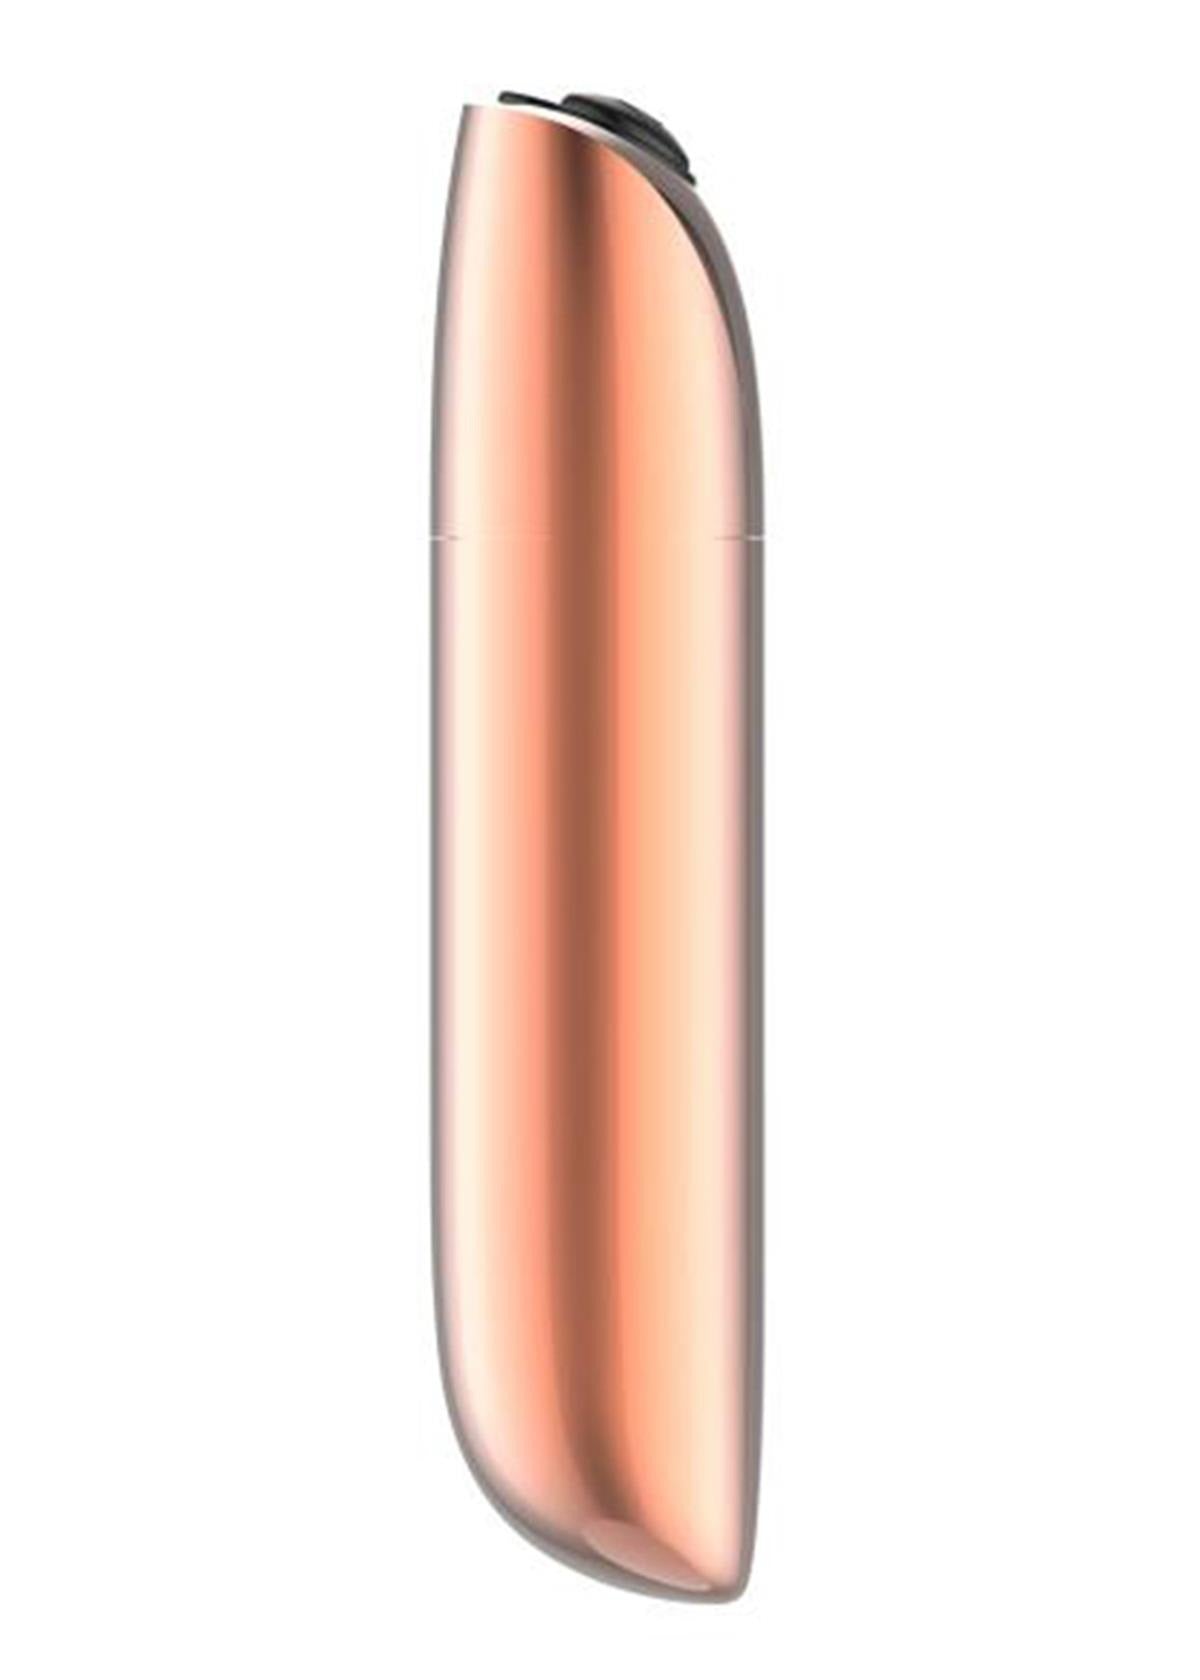 Bossoftoys - 22-00048 - Powerful Bullet Vibrator - USB rechargeable - 20 Functions - Gold